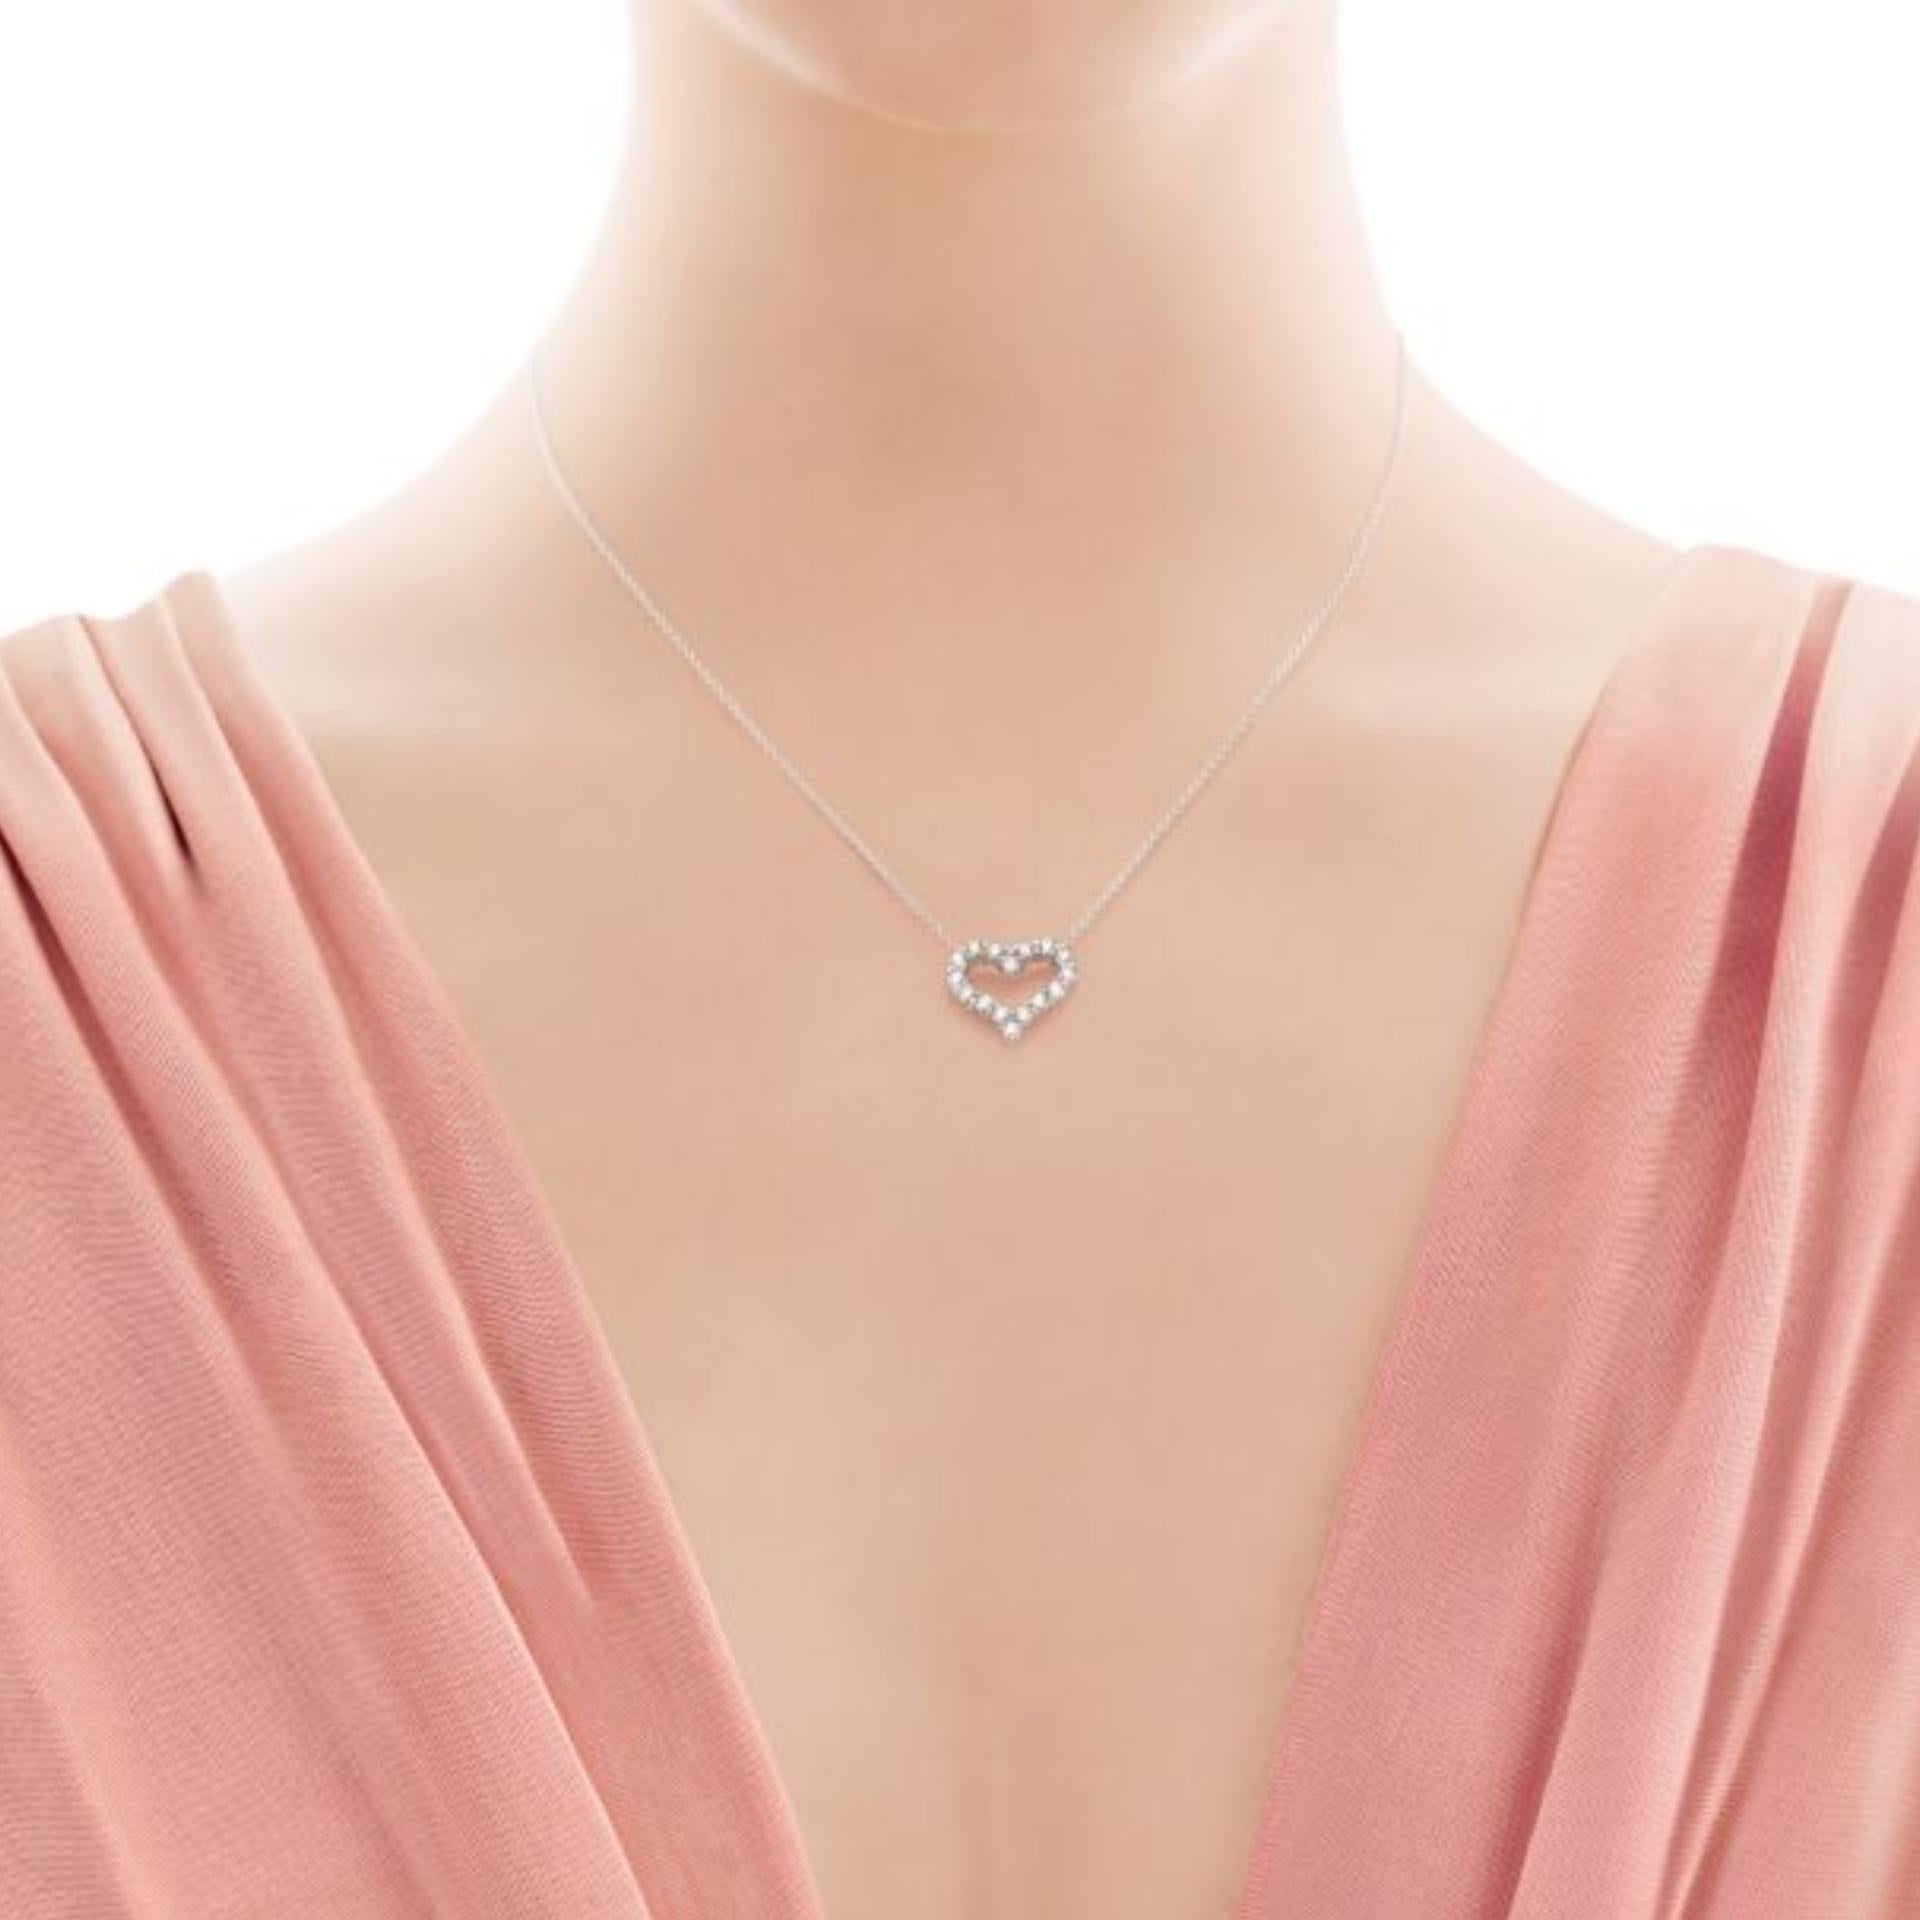 Designer: Tiffany & Co.

Collection: Tiffany & Co. Hearts

Style: Pendant

Metal: Platinum

Metal Purity: 950 

Stones: 16 Diamonds 

Total Carat Weight: 0.54 CT 

Chain Length: 16 in - Small 

Total Weight (g): 3.20 g 

Includes: 24 month